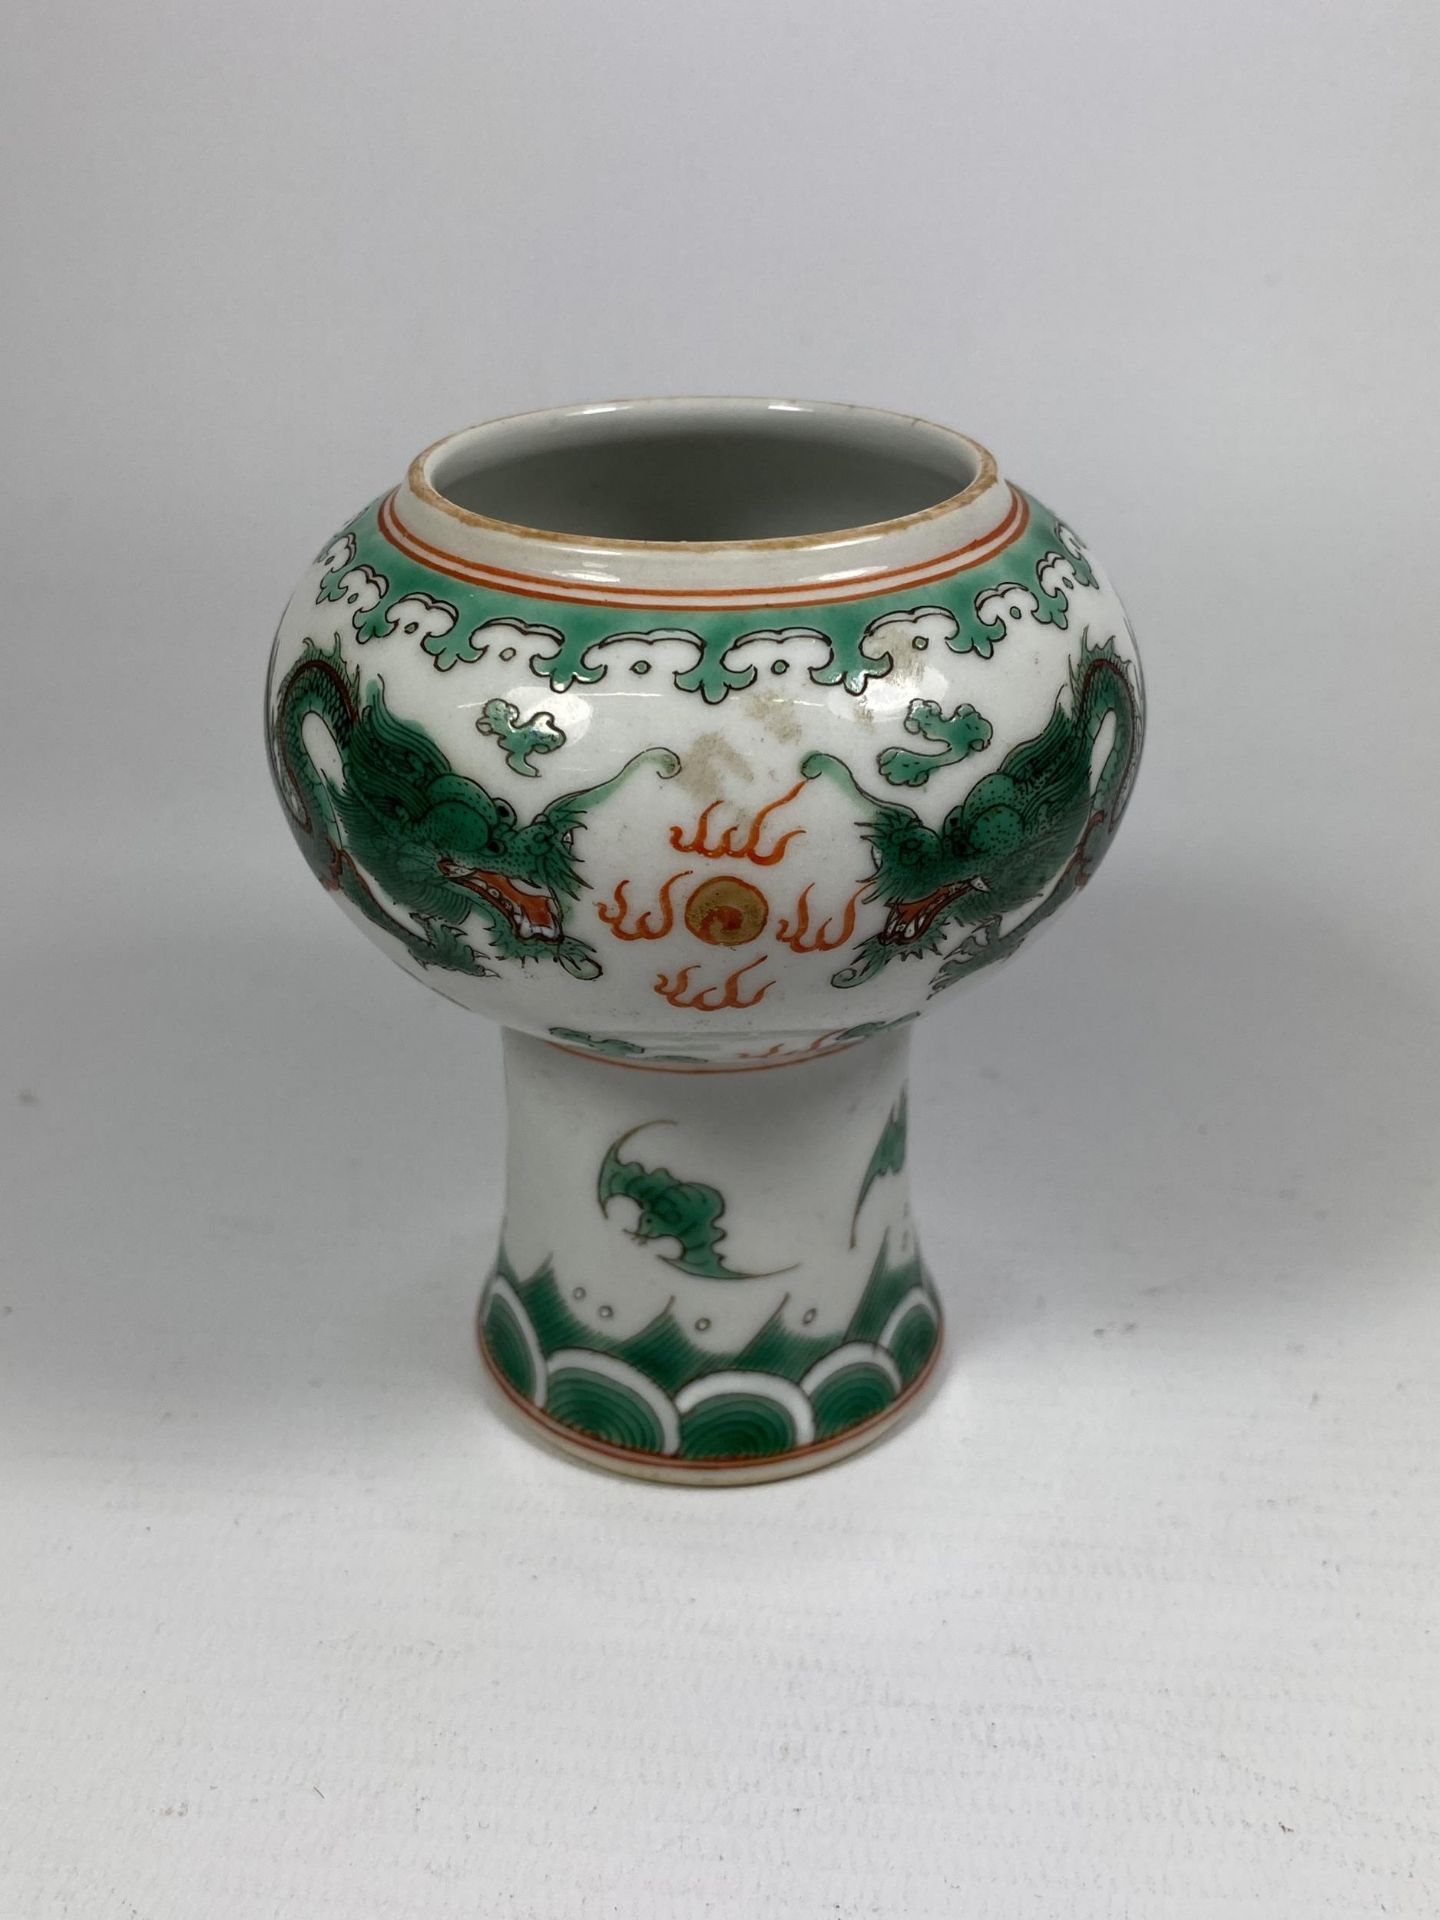 A CHINESE FAMILLE VERTE STEM CUP / VASE WITH DRAGON CHASING FLAMING PEARL DESIGN, SIX CHARACTER MARK